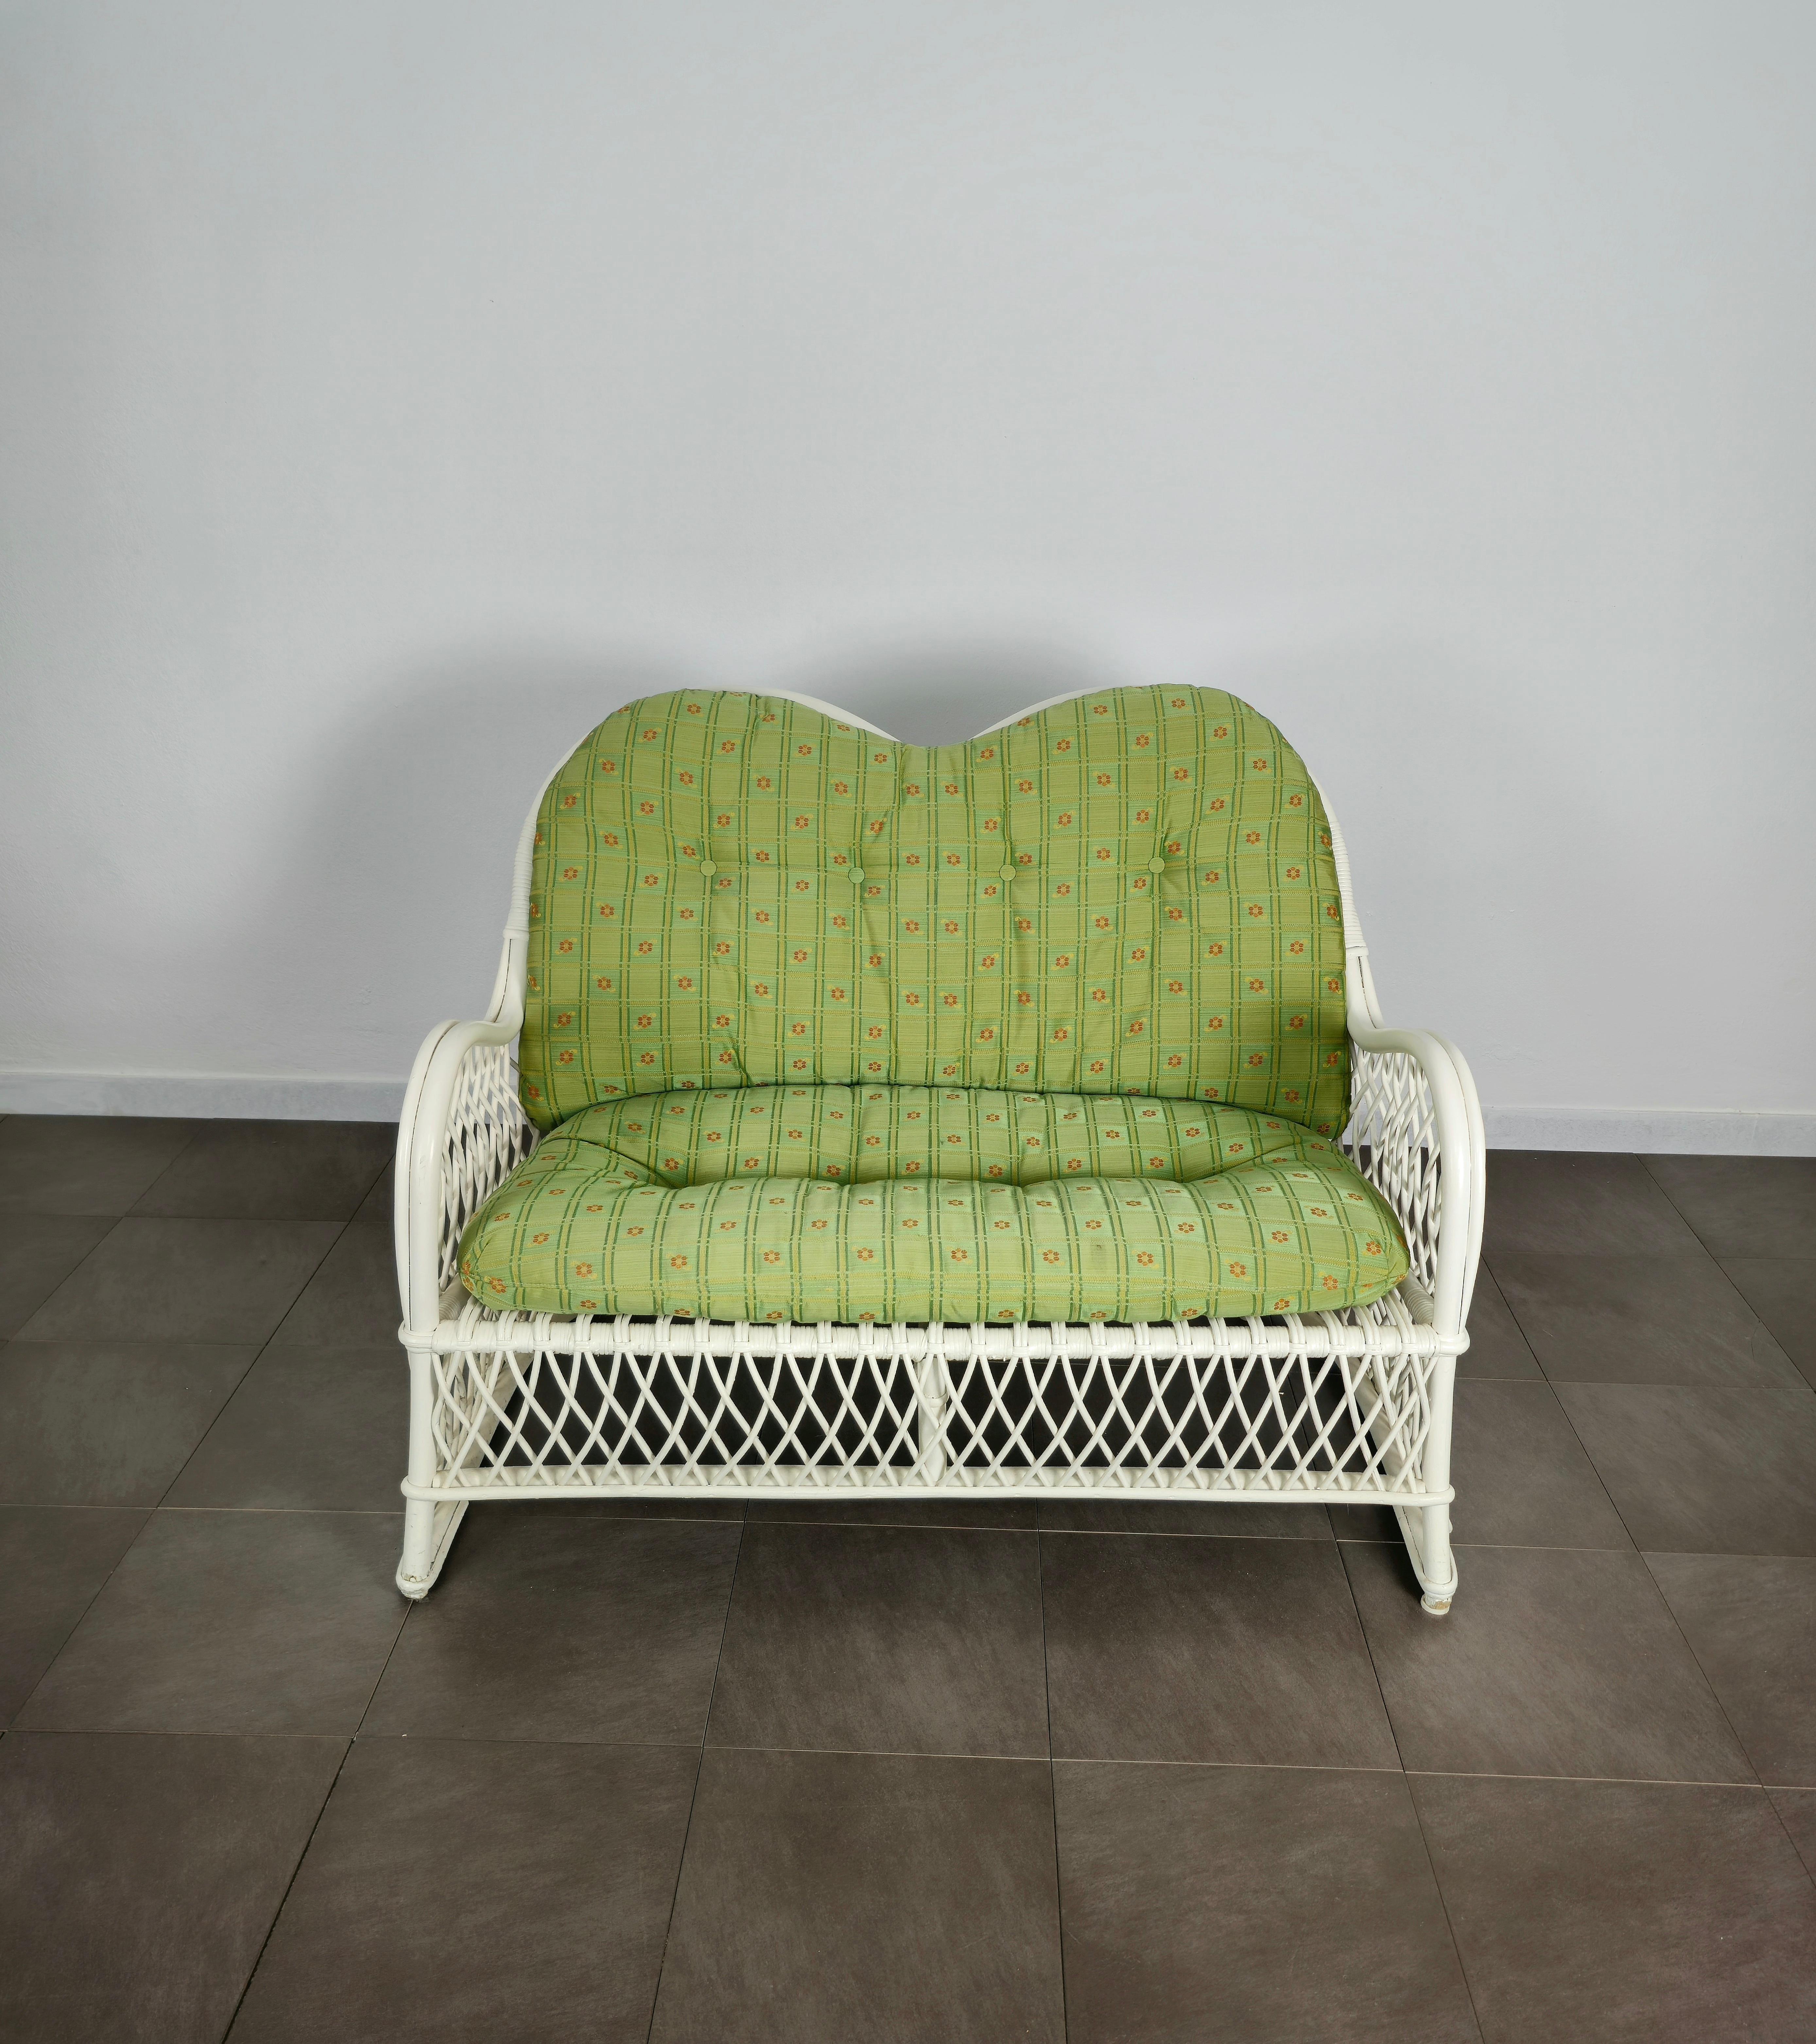 Two-seater sofa attributed to Vivai del sud, produced in Italy in the 170s.
The sofa was made of bamboo and white enamelled woven rattan with green patterned fabric padding.




Note: We try to offer our customers an excellent service even in